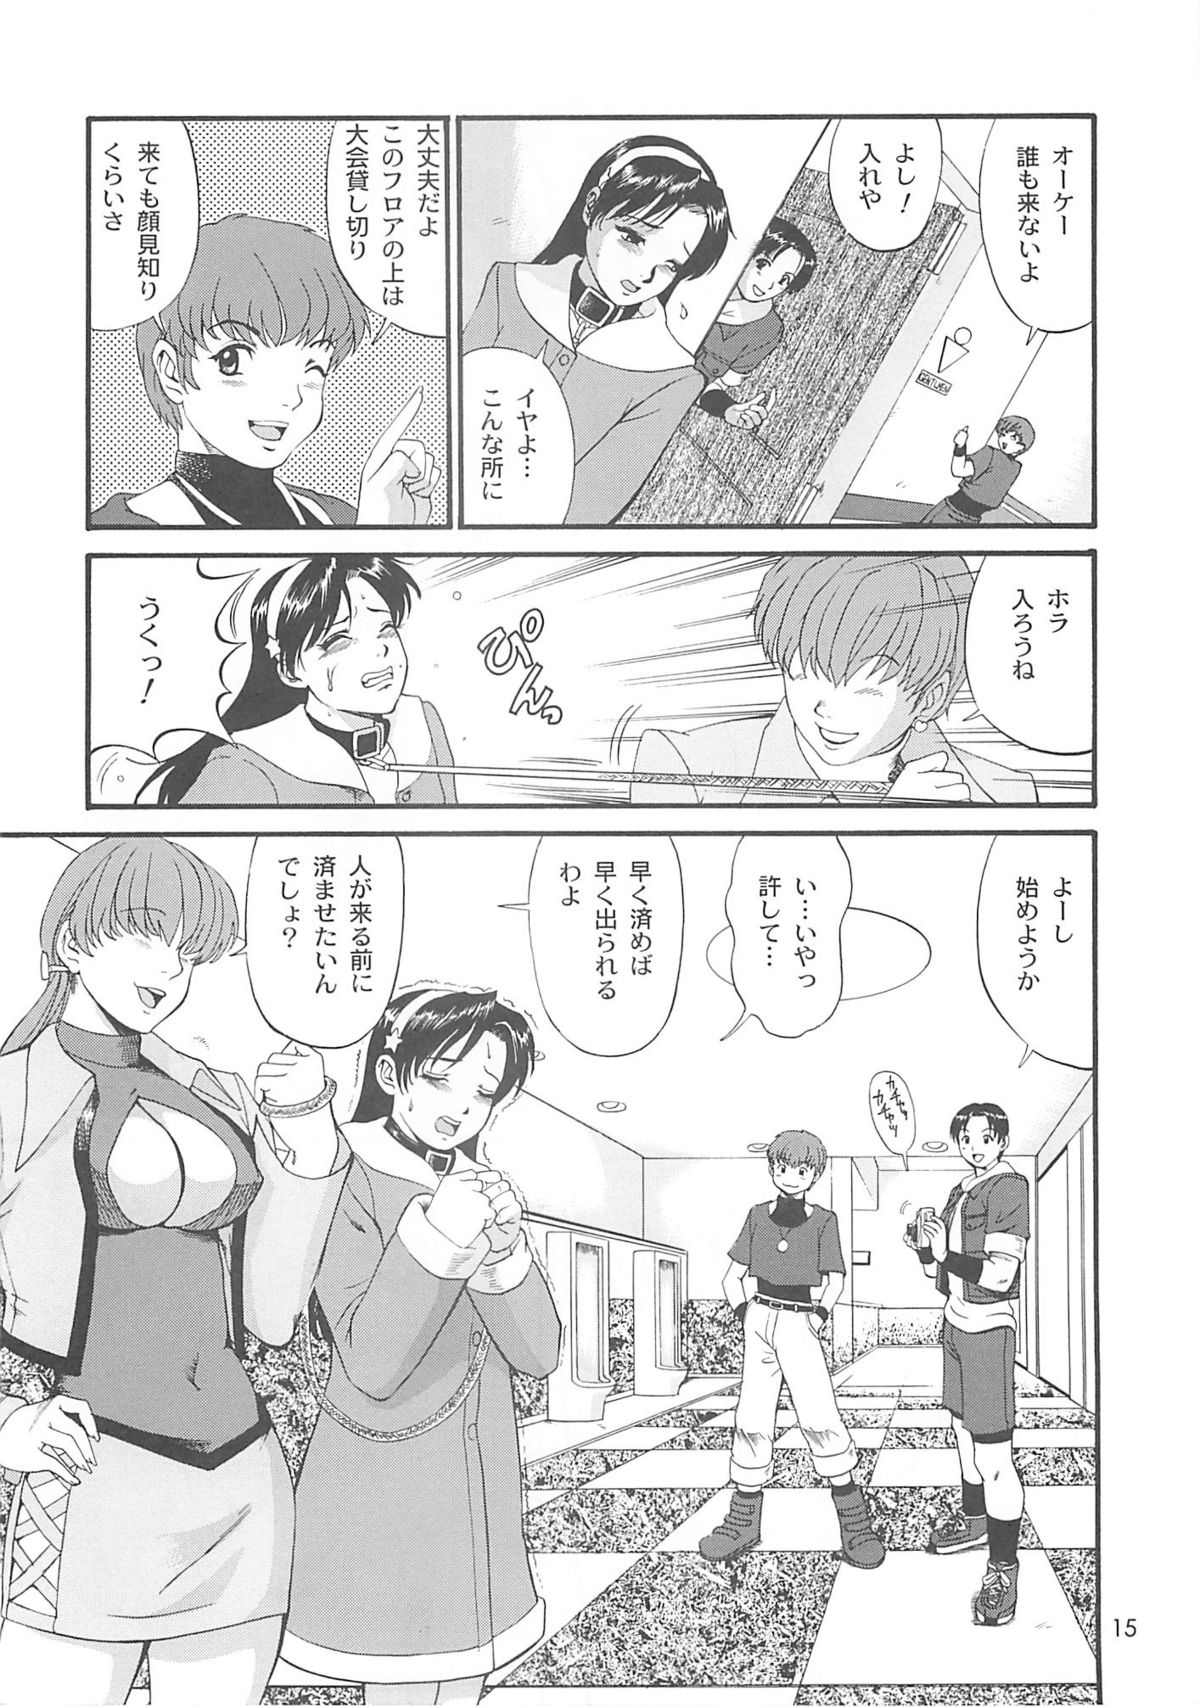 (C63) [Saigado] The Athena & Friends 2002 (King of Fighters) page 14 full